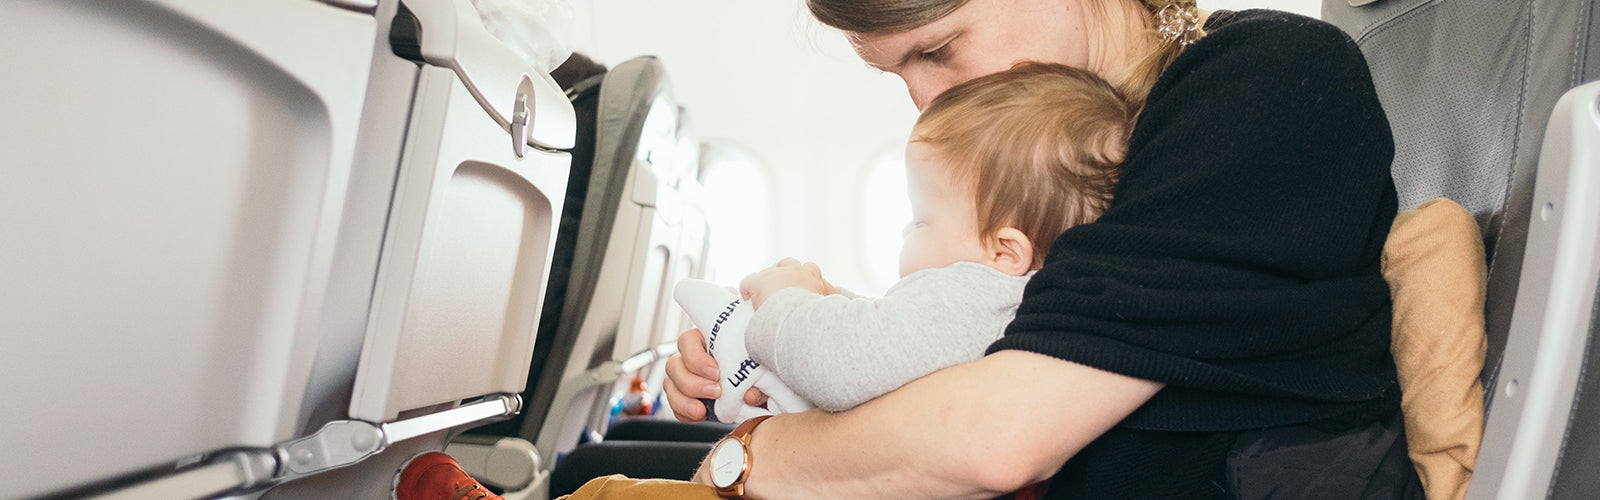 Tips to Make Flying with Baby Stress-Free